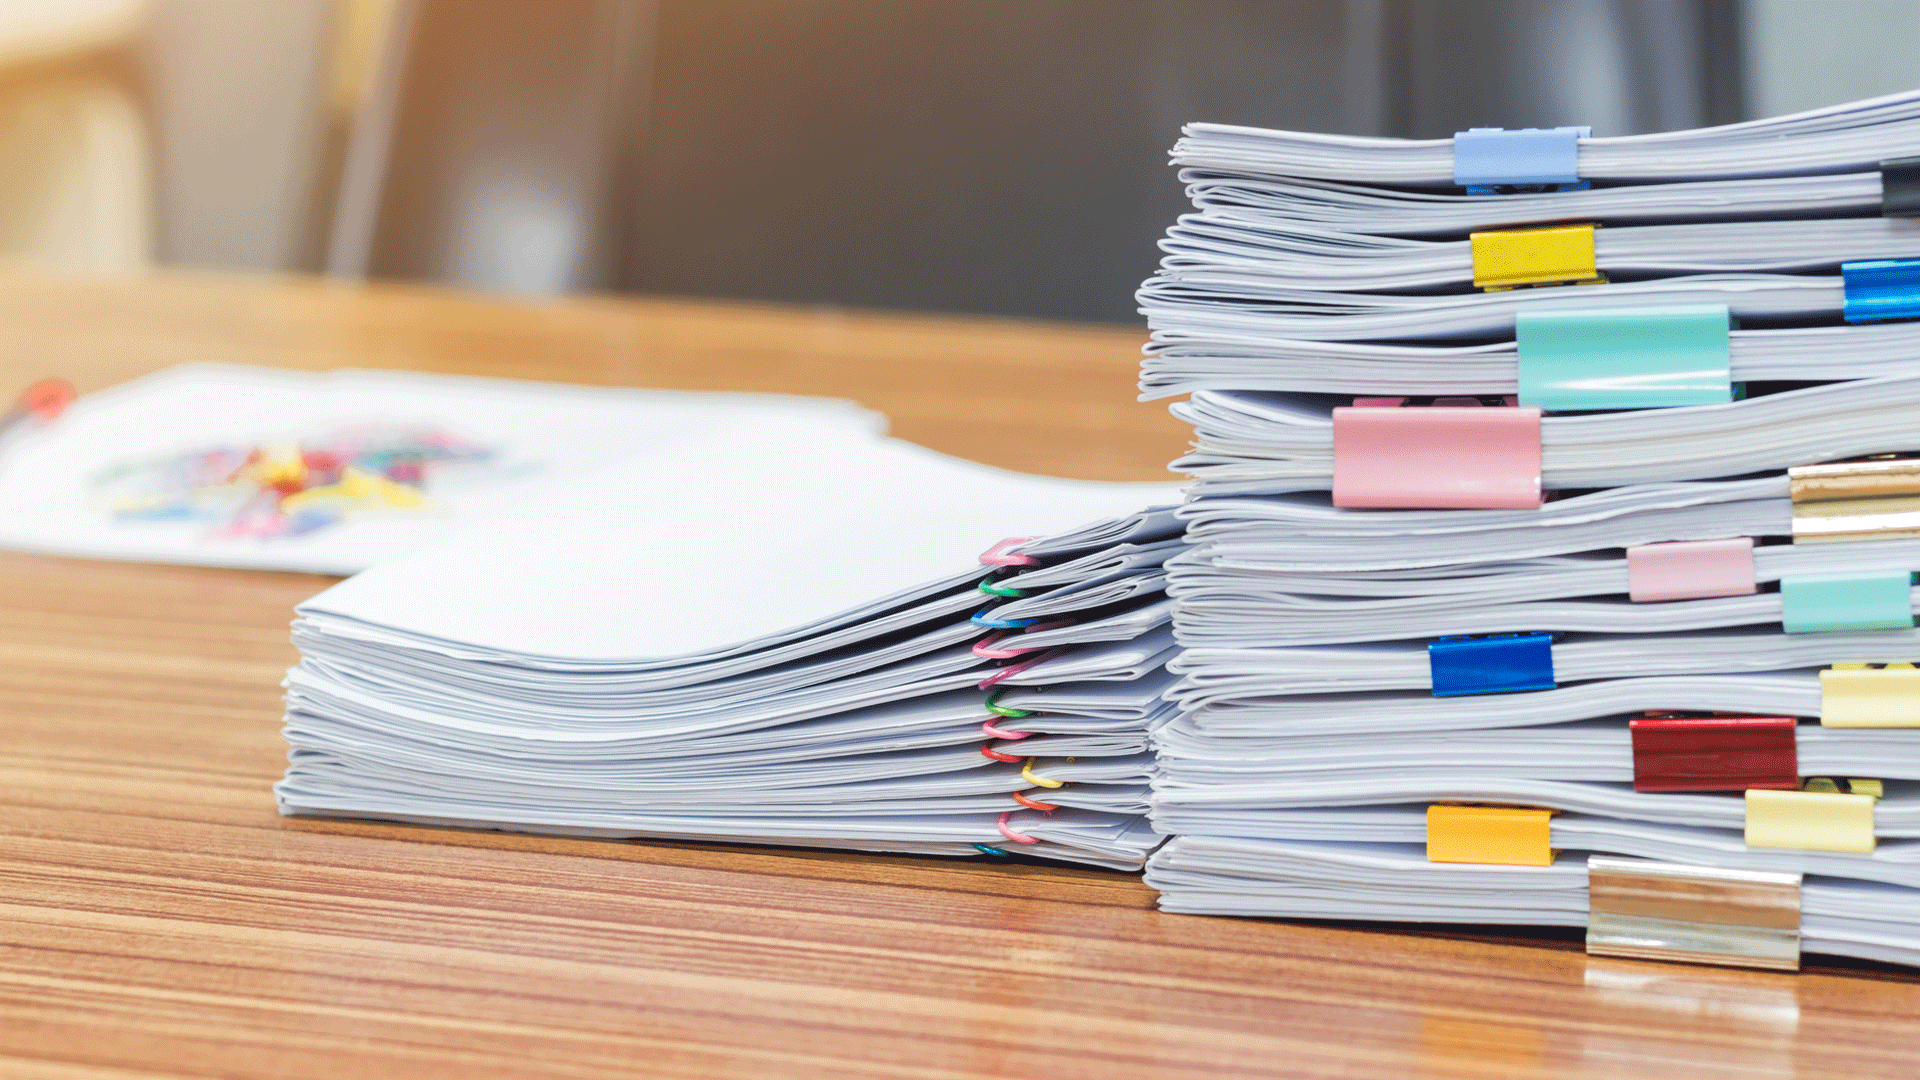 paper documents on the desk